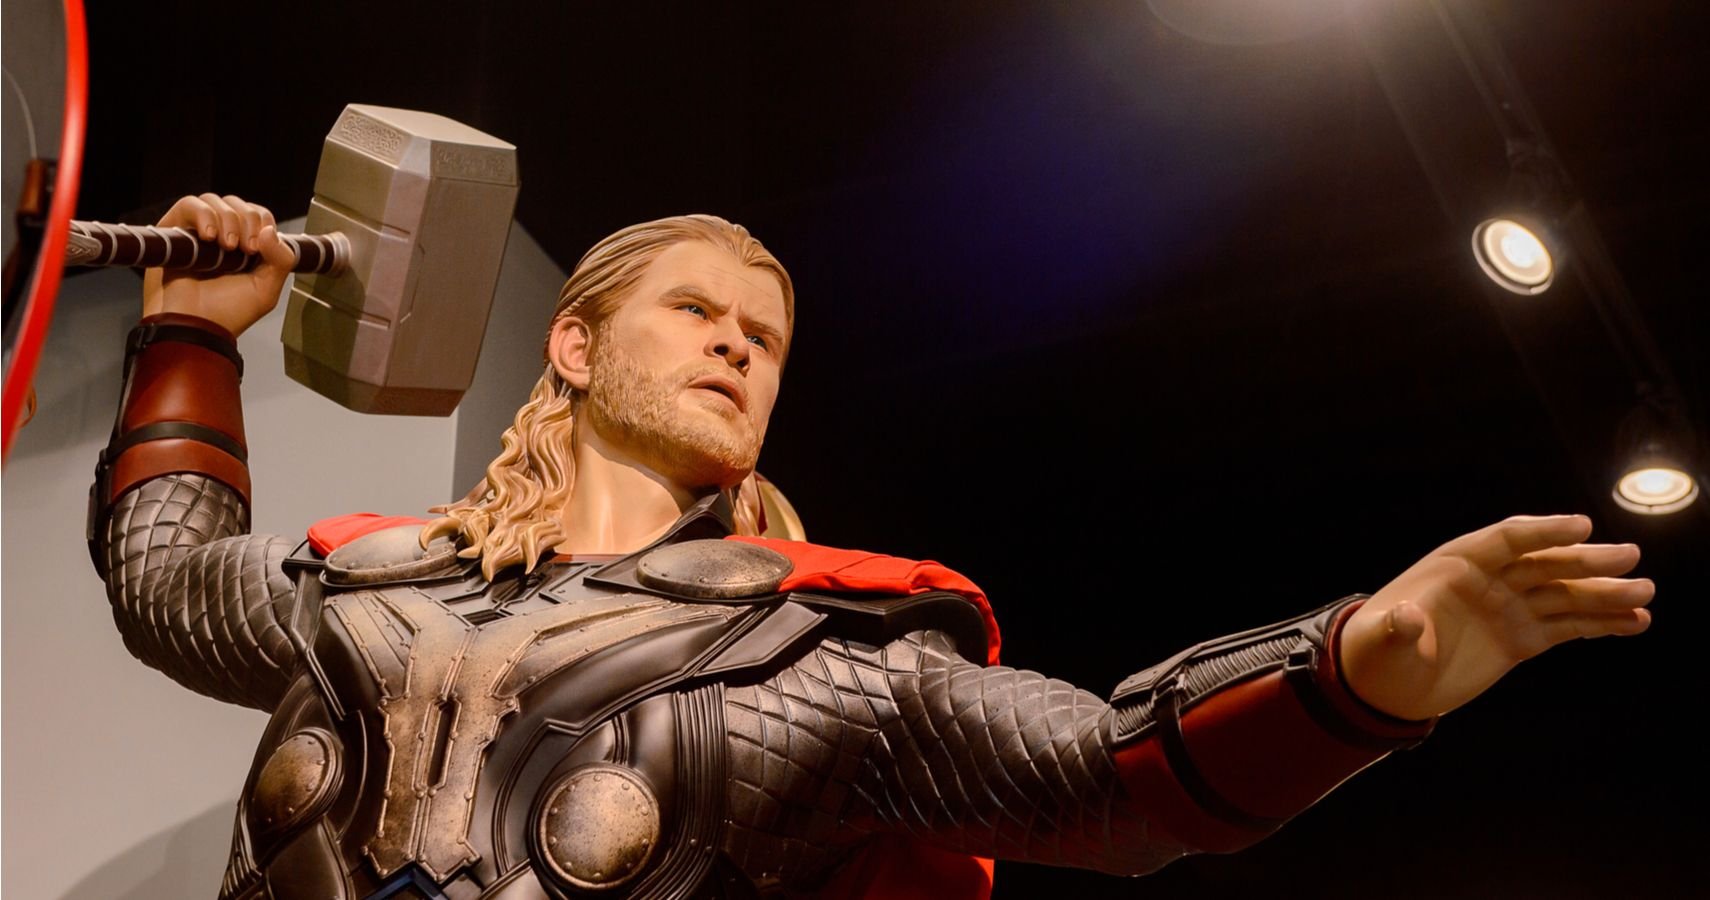 Real-Life Thor Story: Here's How Chris Hemsworth Grew His Million-Dollar Fortune